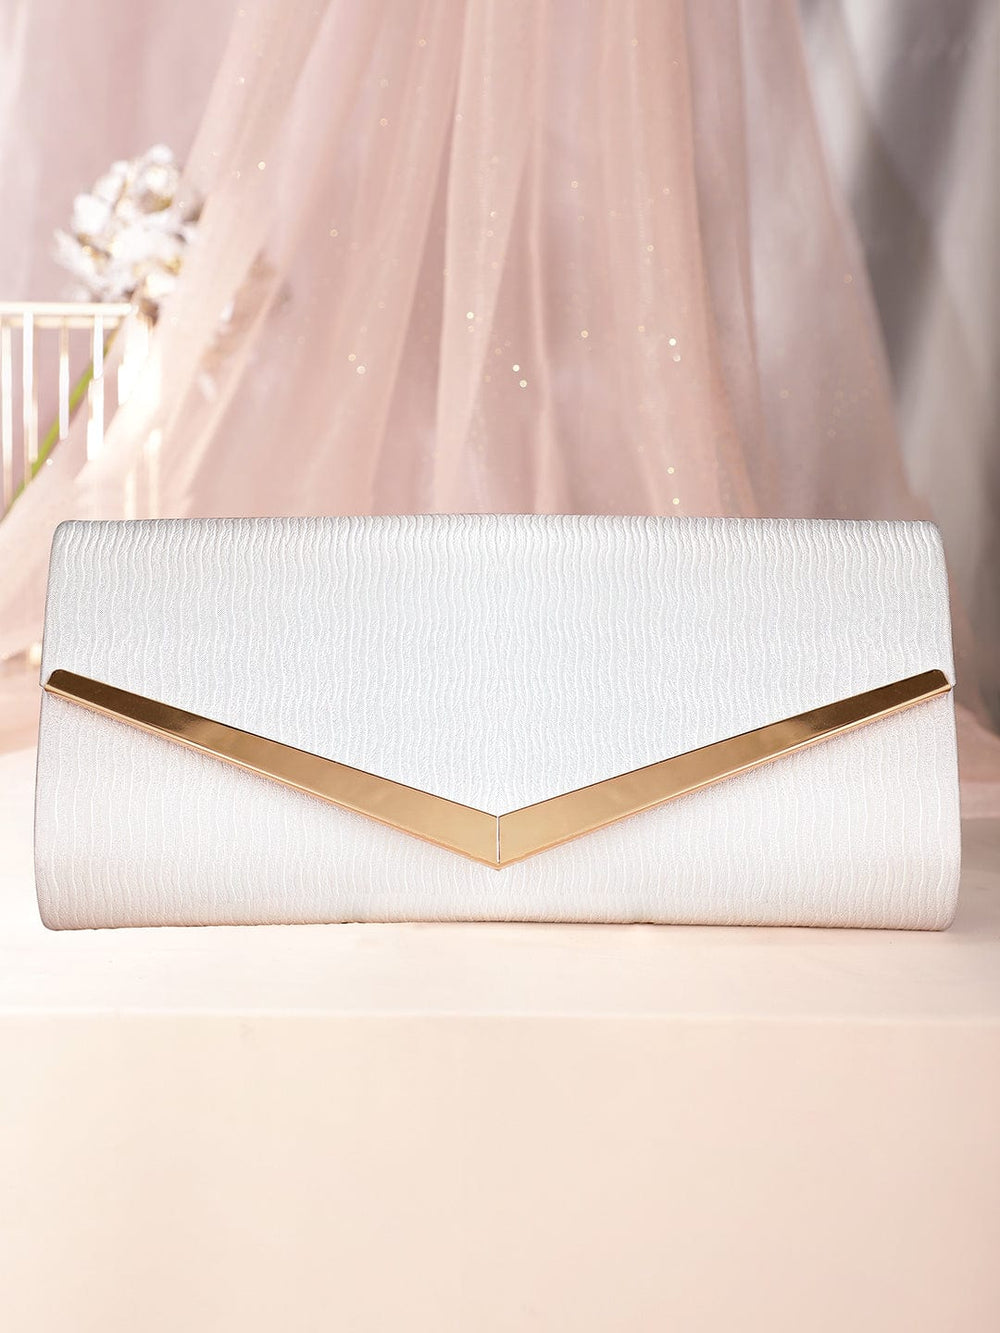 Rubans Chic Simplicity Handcrafted Beige Textured Glossy Finish Clutch Bag Handbag, Wallet Accessories & Clutches